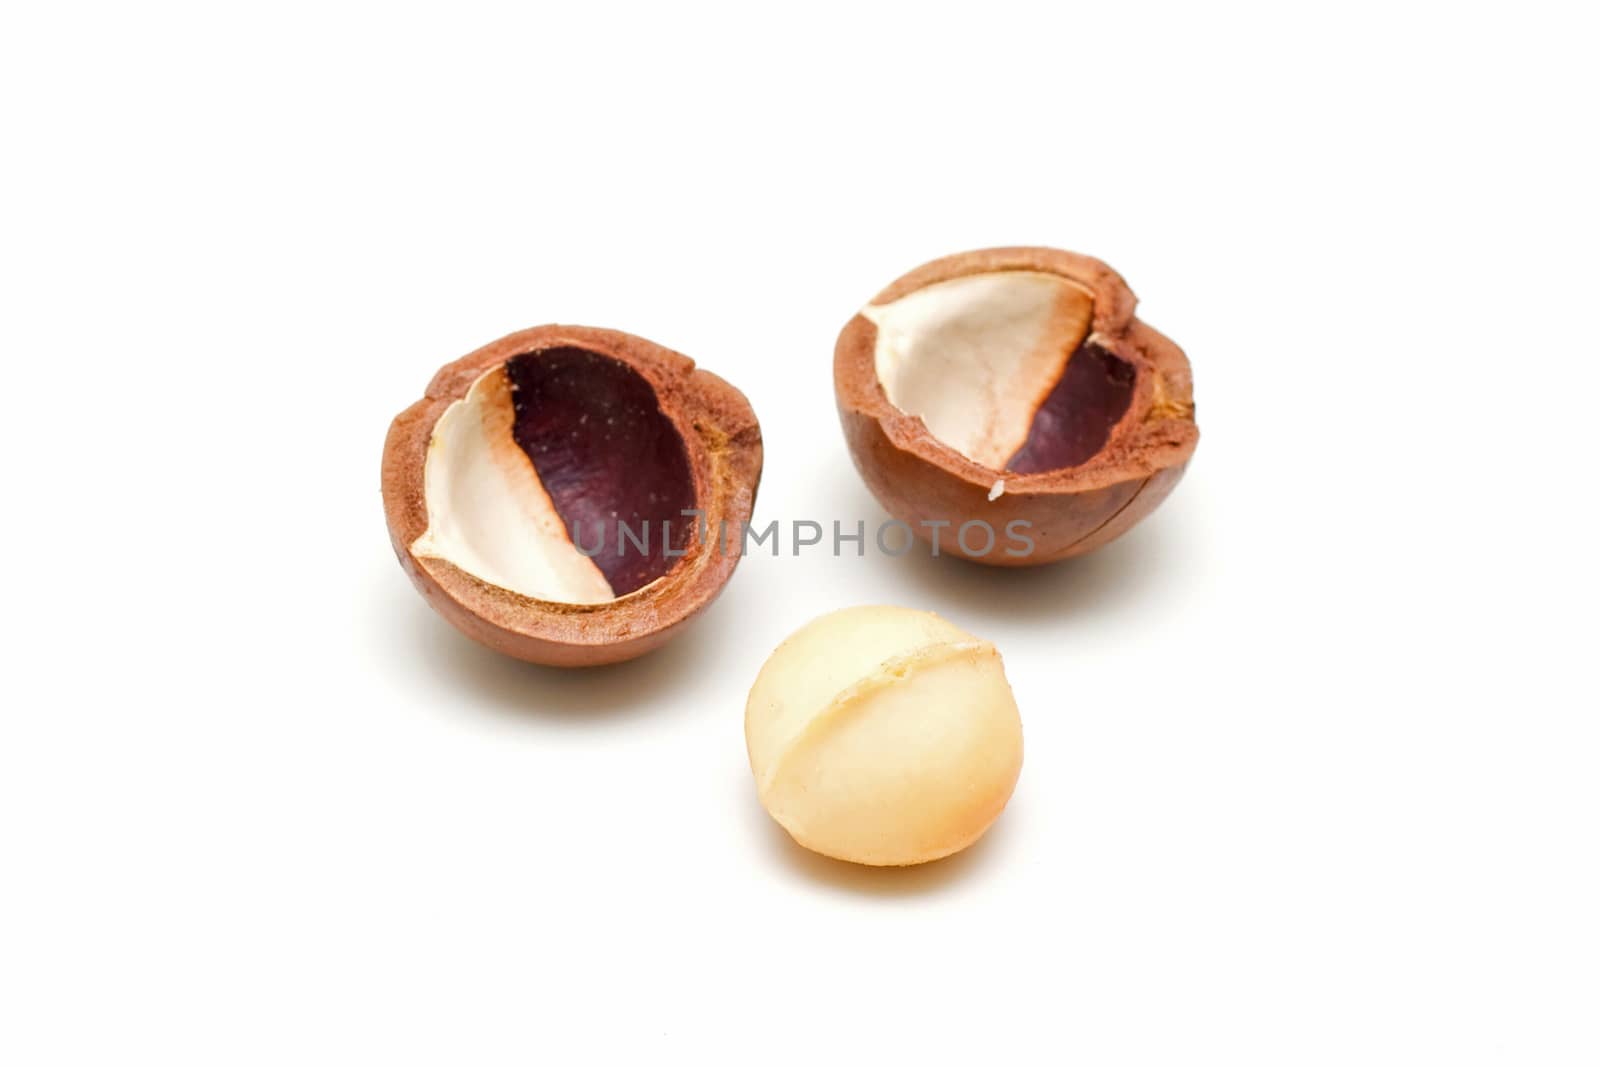 Macadamia nuts isolated on white background by myyaym